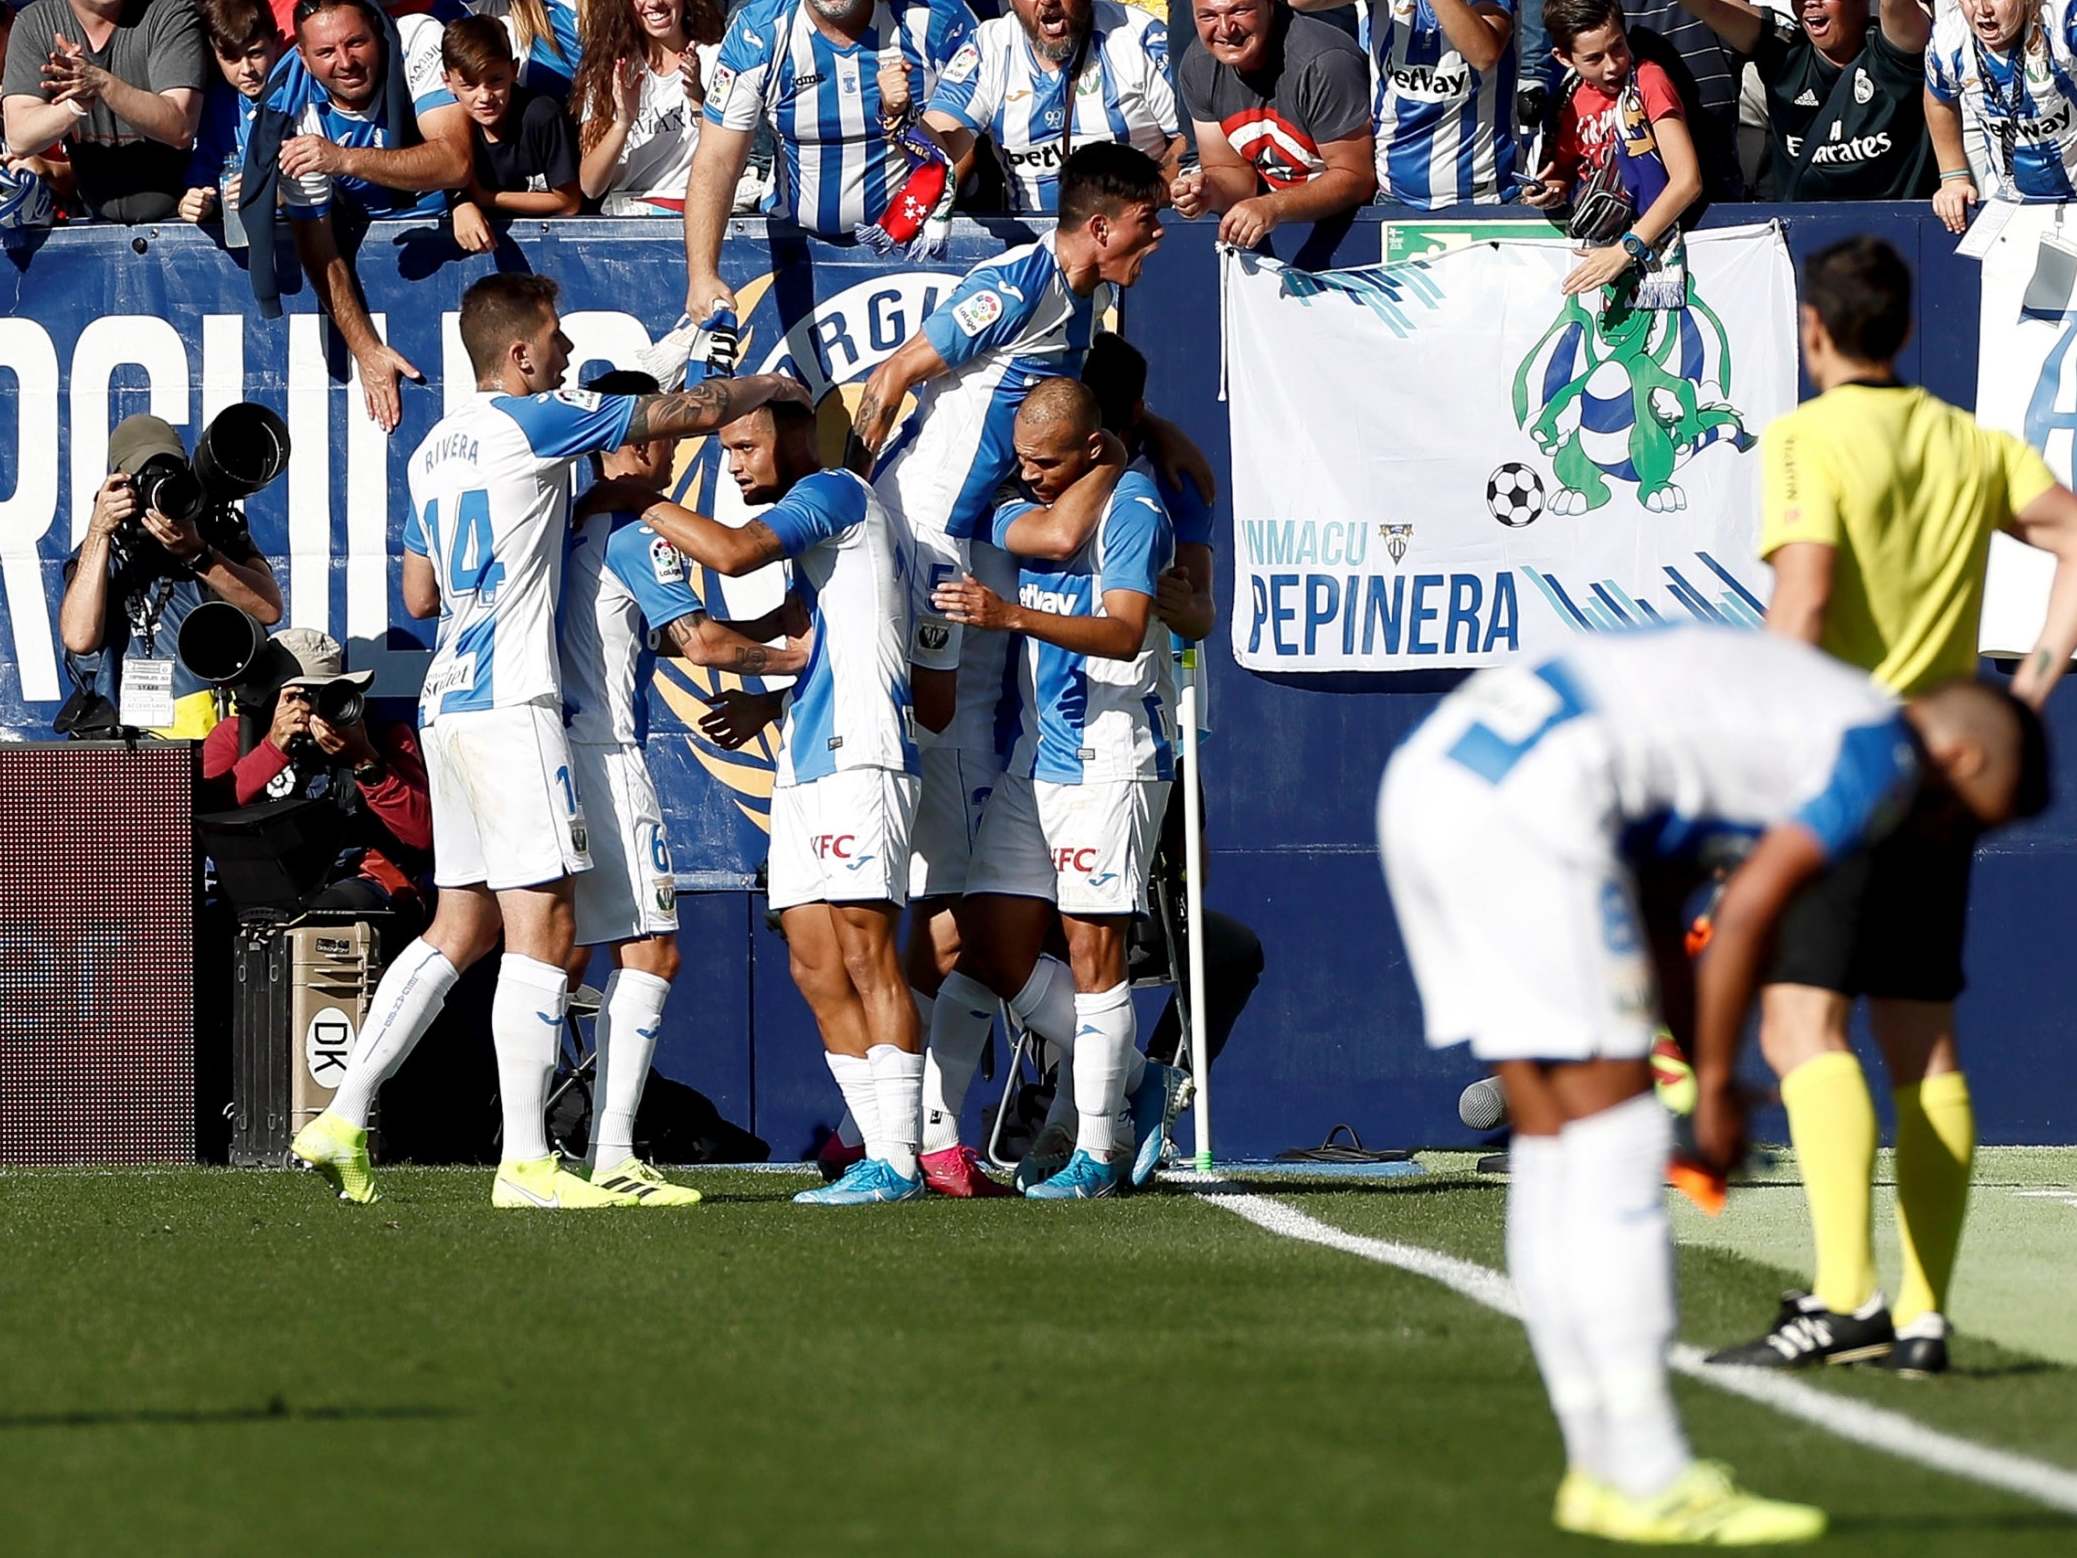 Leganes secured what could prove to be an important three points